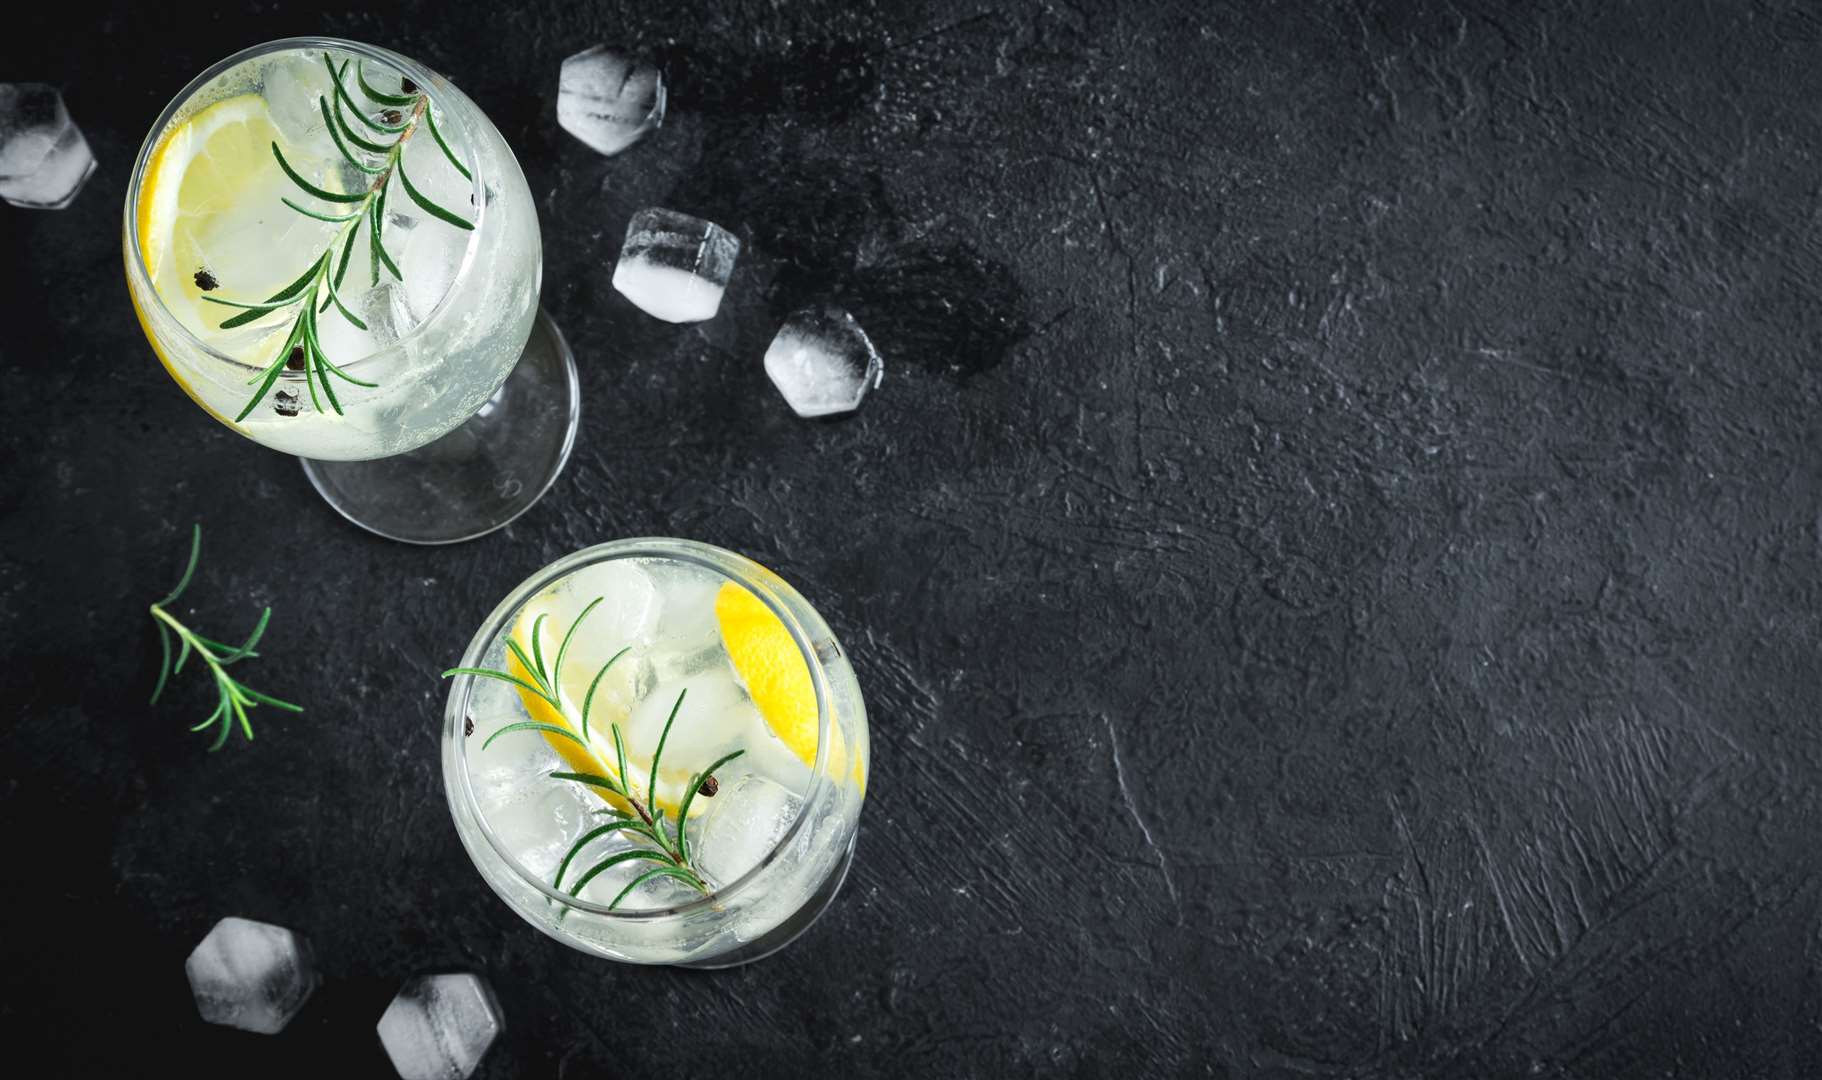 Gin continues to grow in popularity as a summer cocktail base because it is totally customisable as well as incredibly thirst-quenching during summer heatwaves.